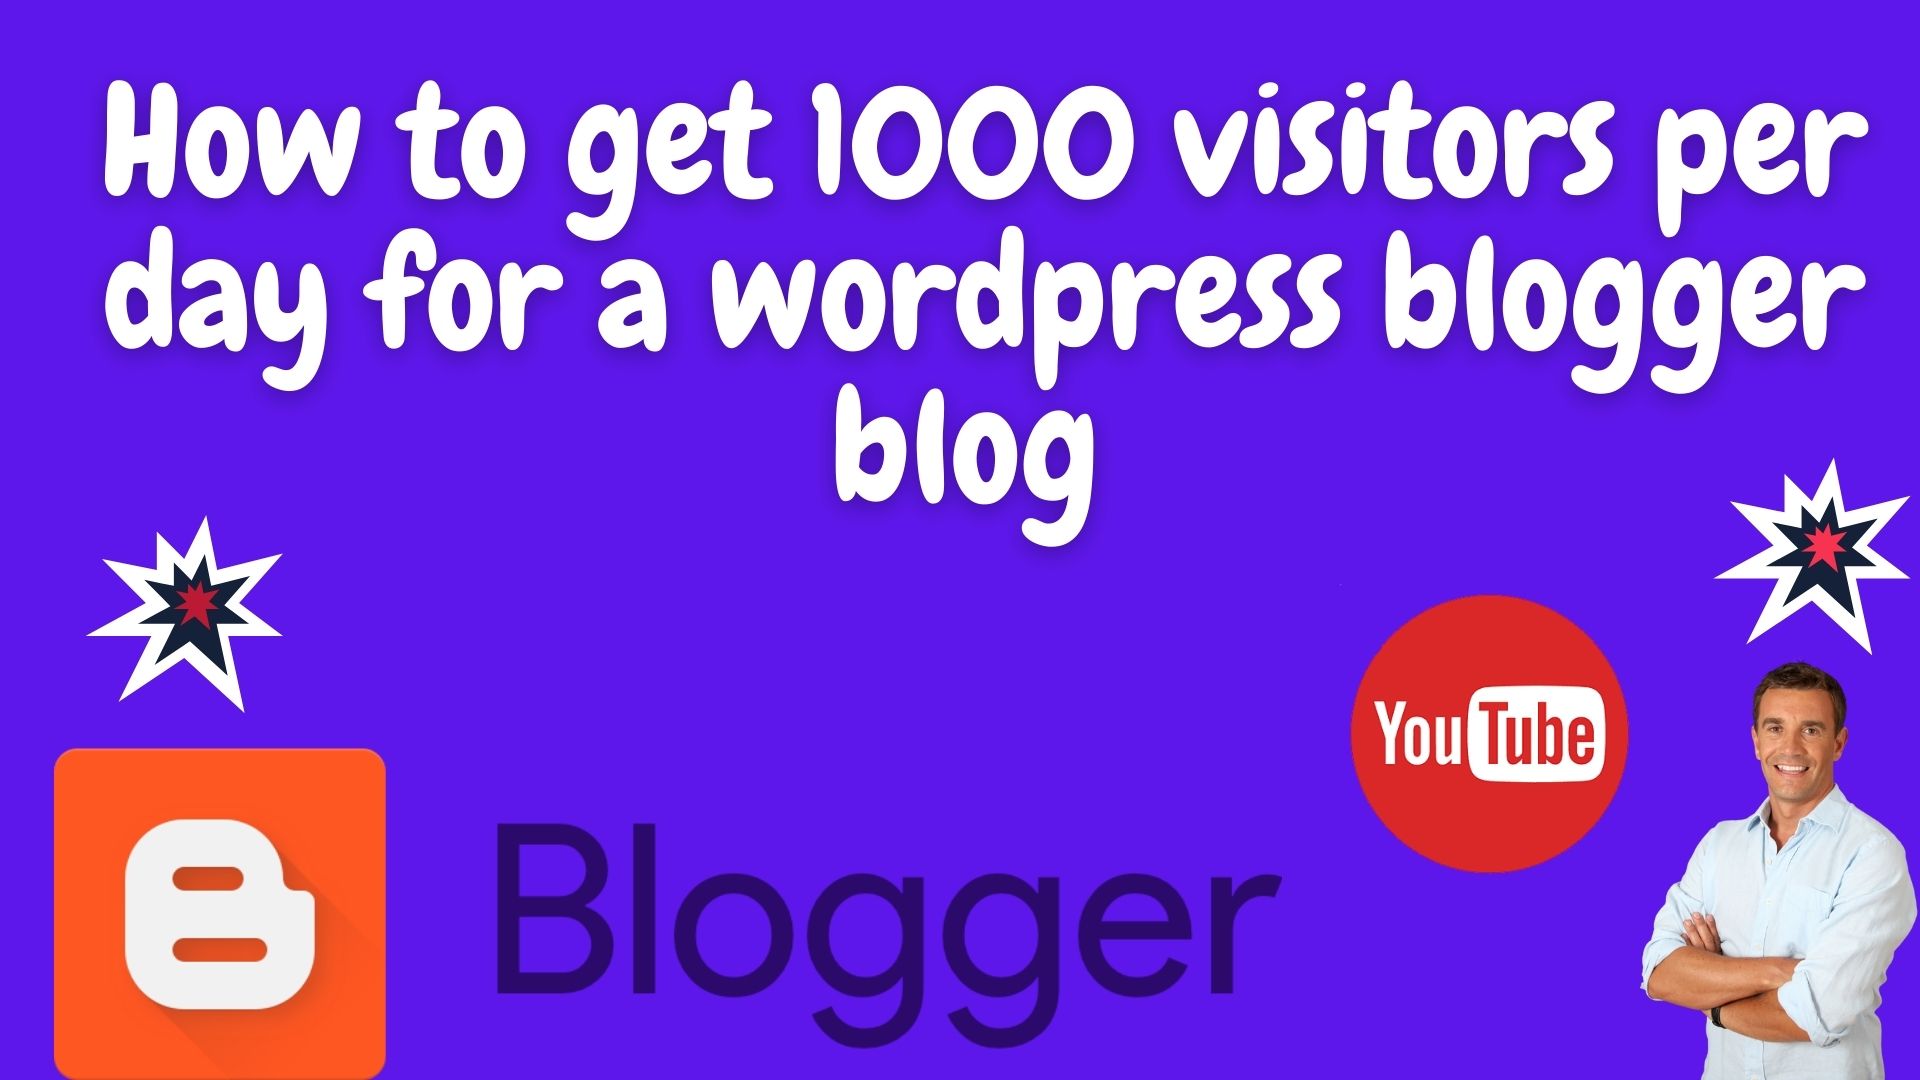 How to get 1000 visitors per day for a wordpress blogger blog 